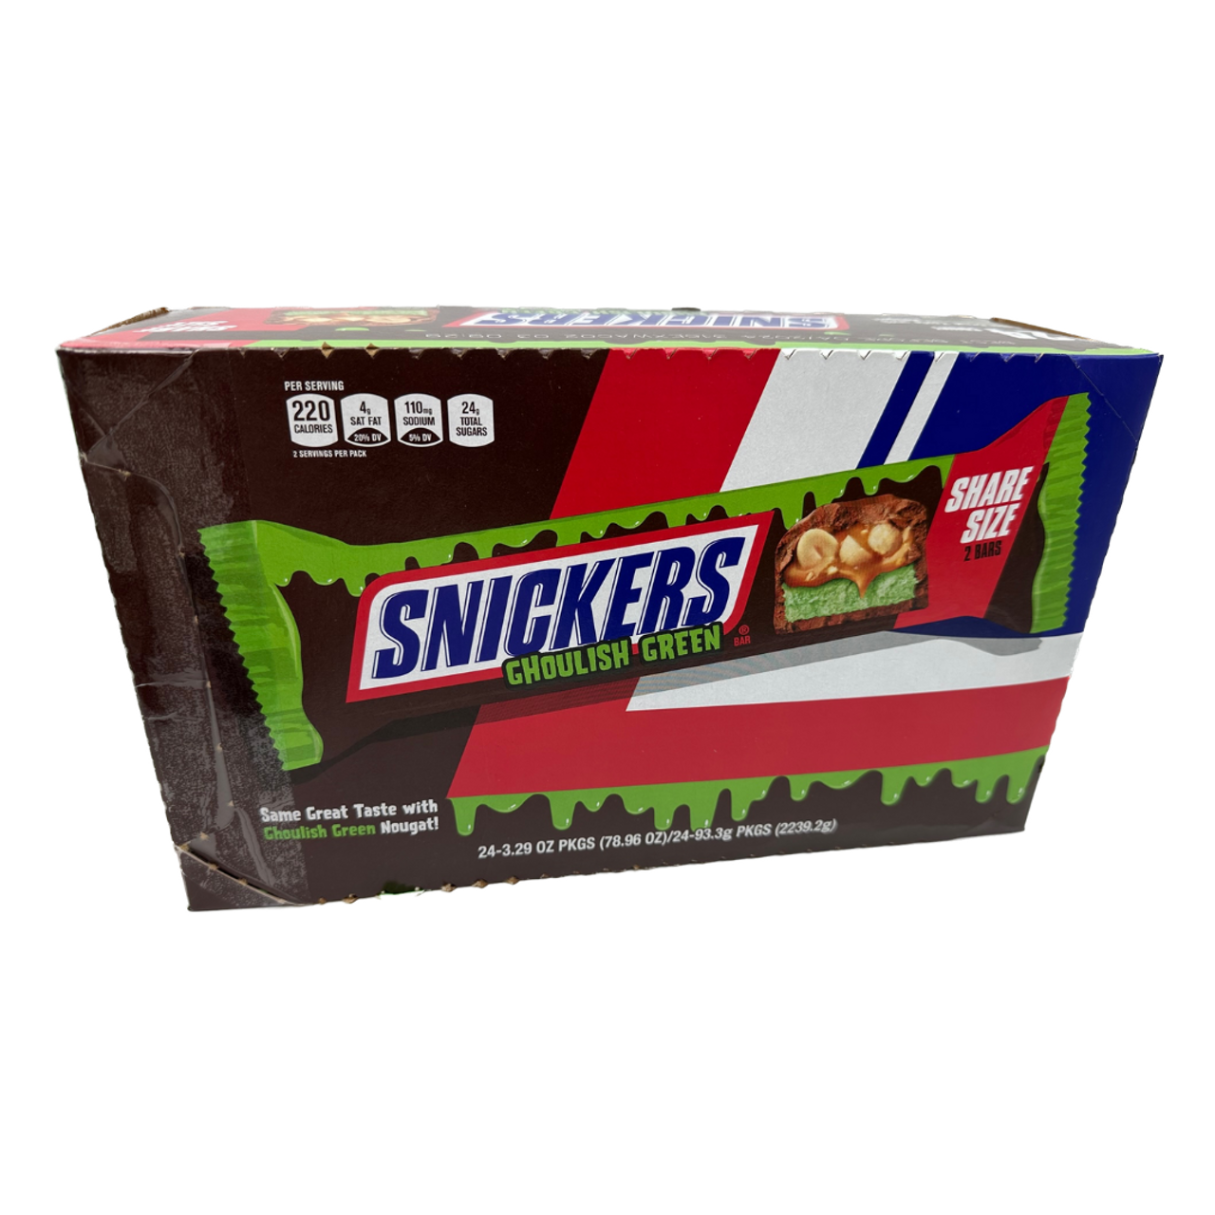 Snickers Ghoulish Green Share Size Bars Box - 3.29oz